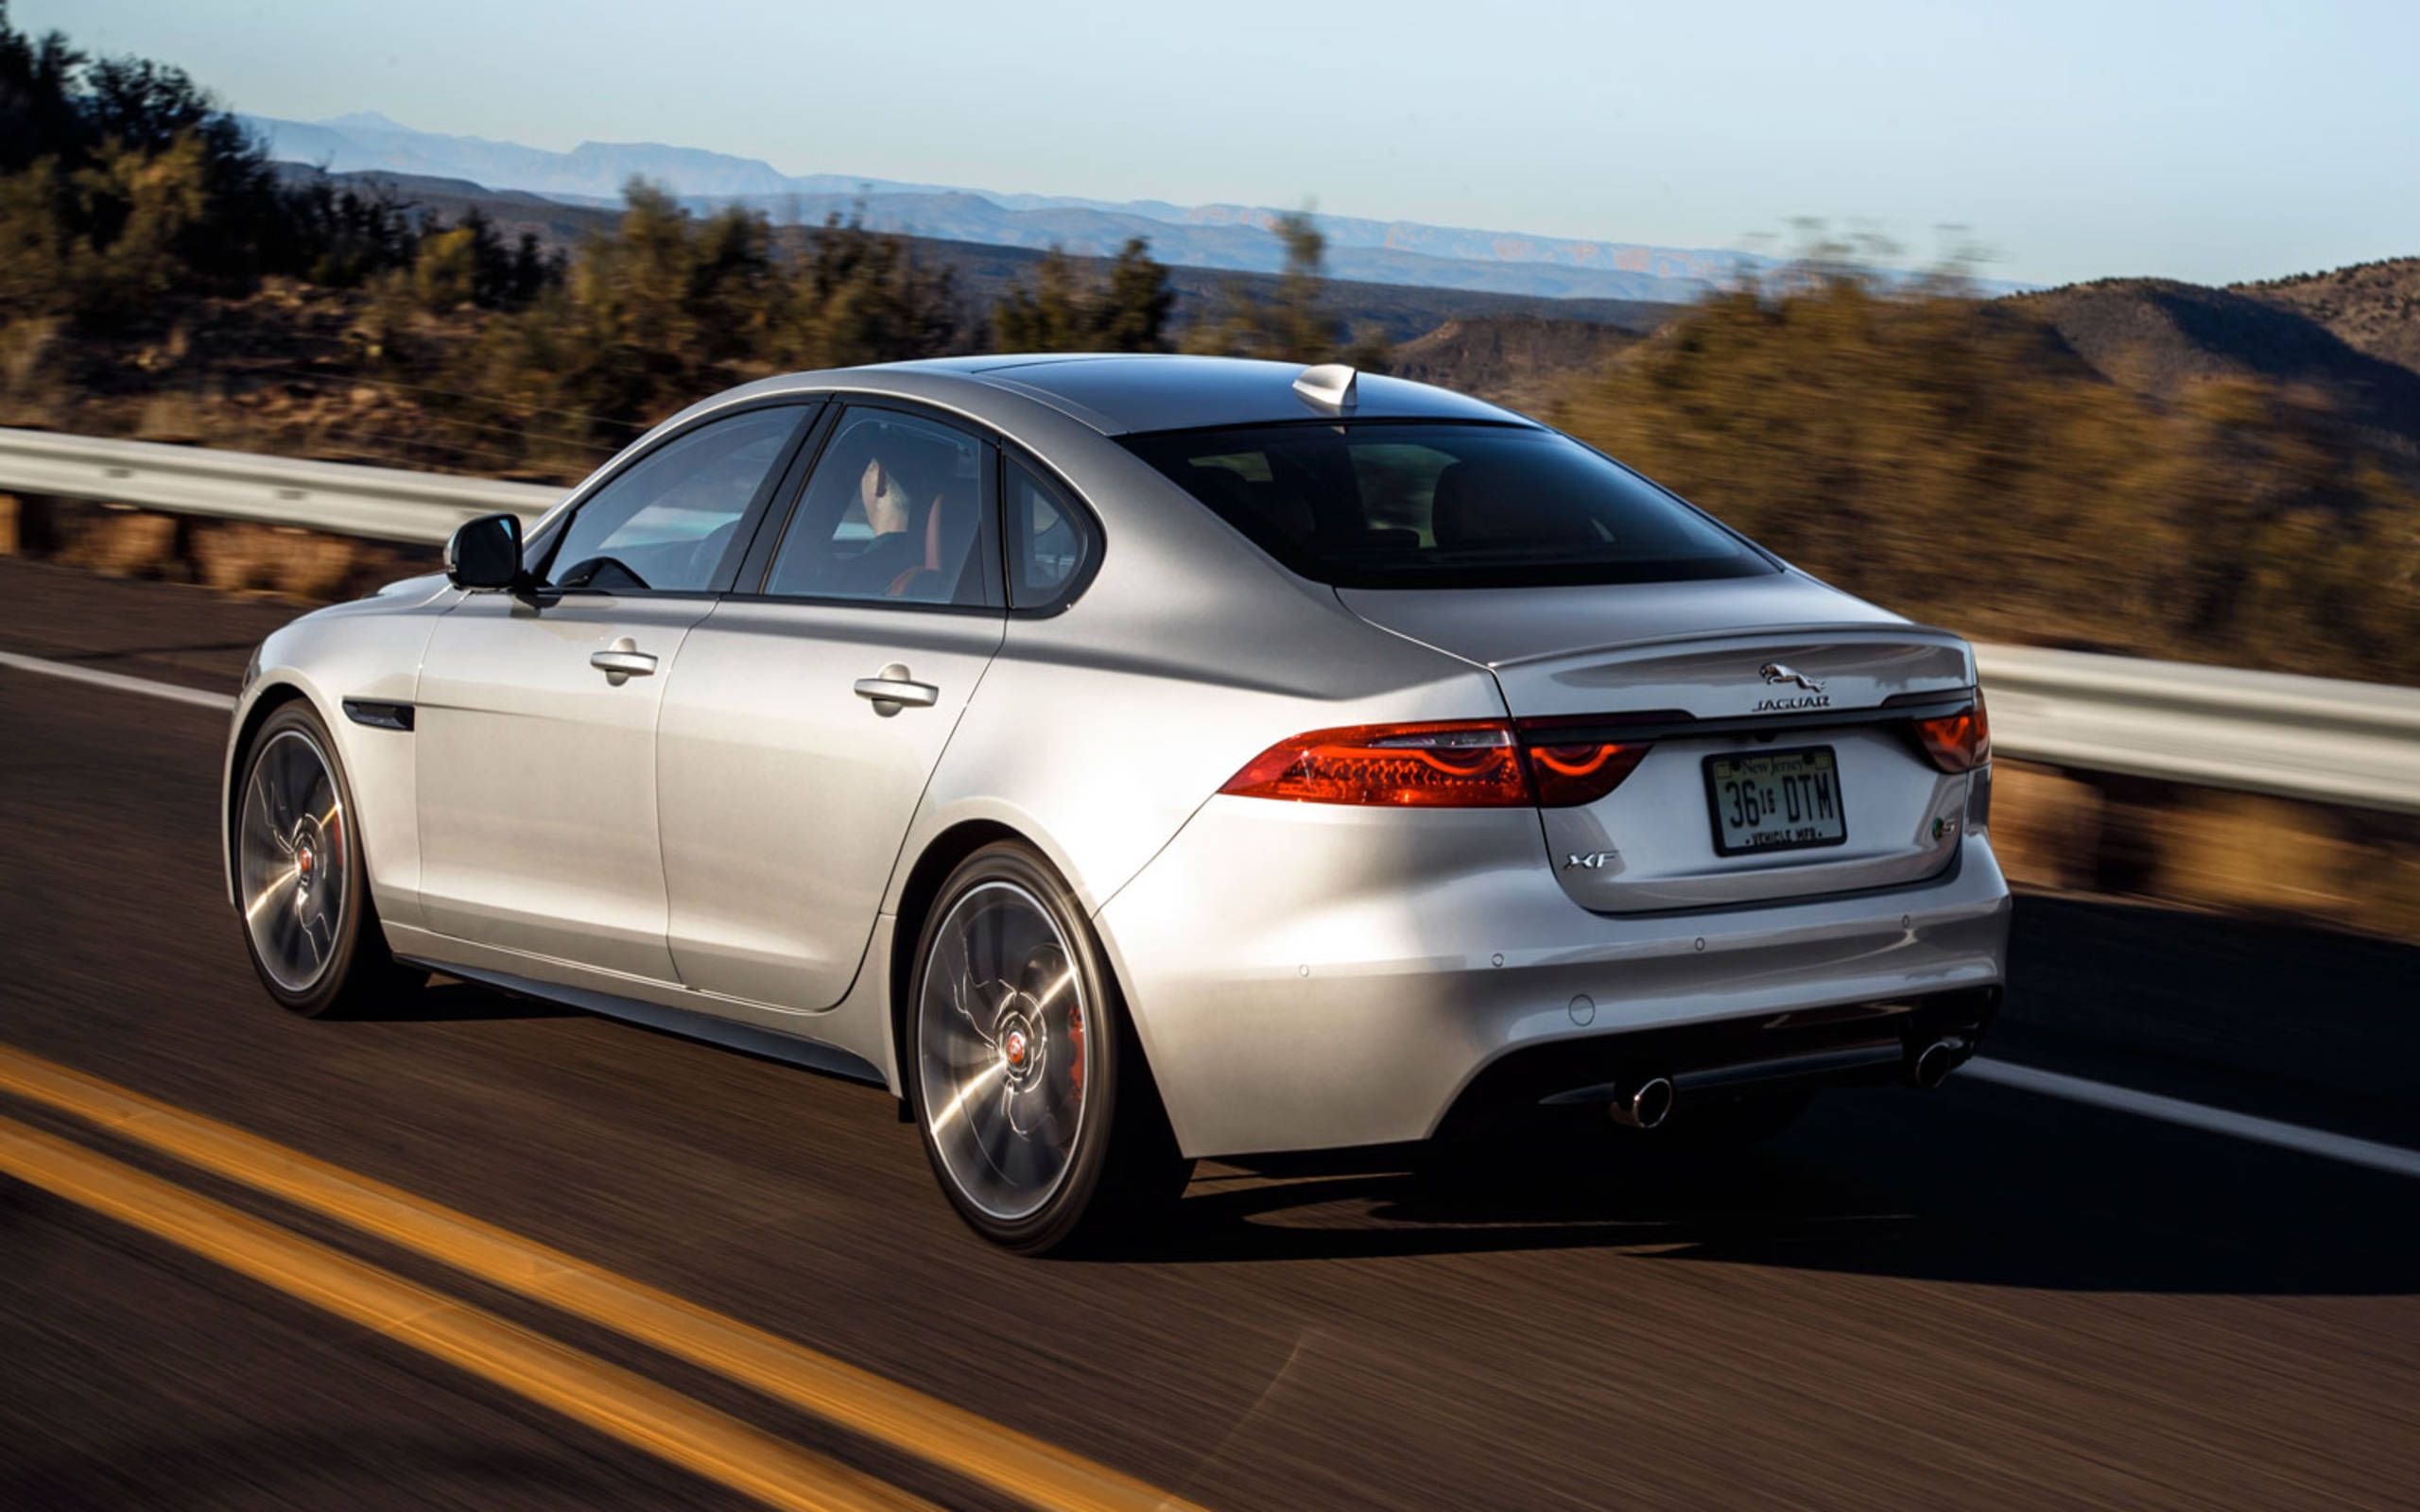 2016 Jaguar XF S review: Can a supercharged six tackle Germany's